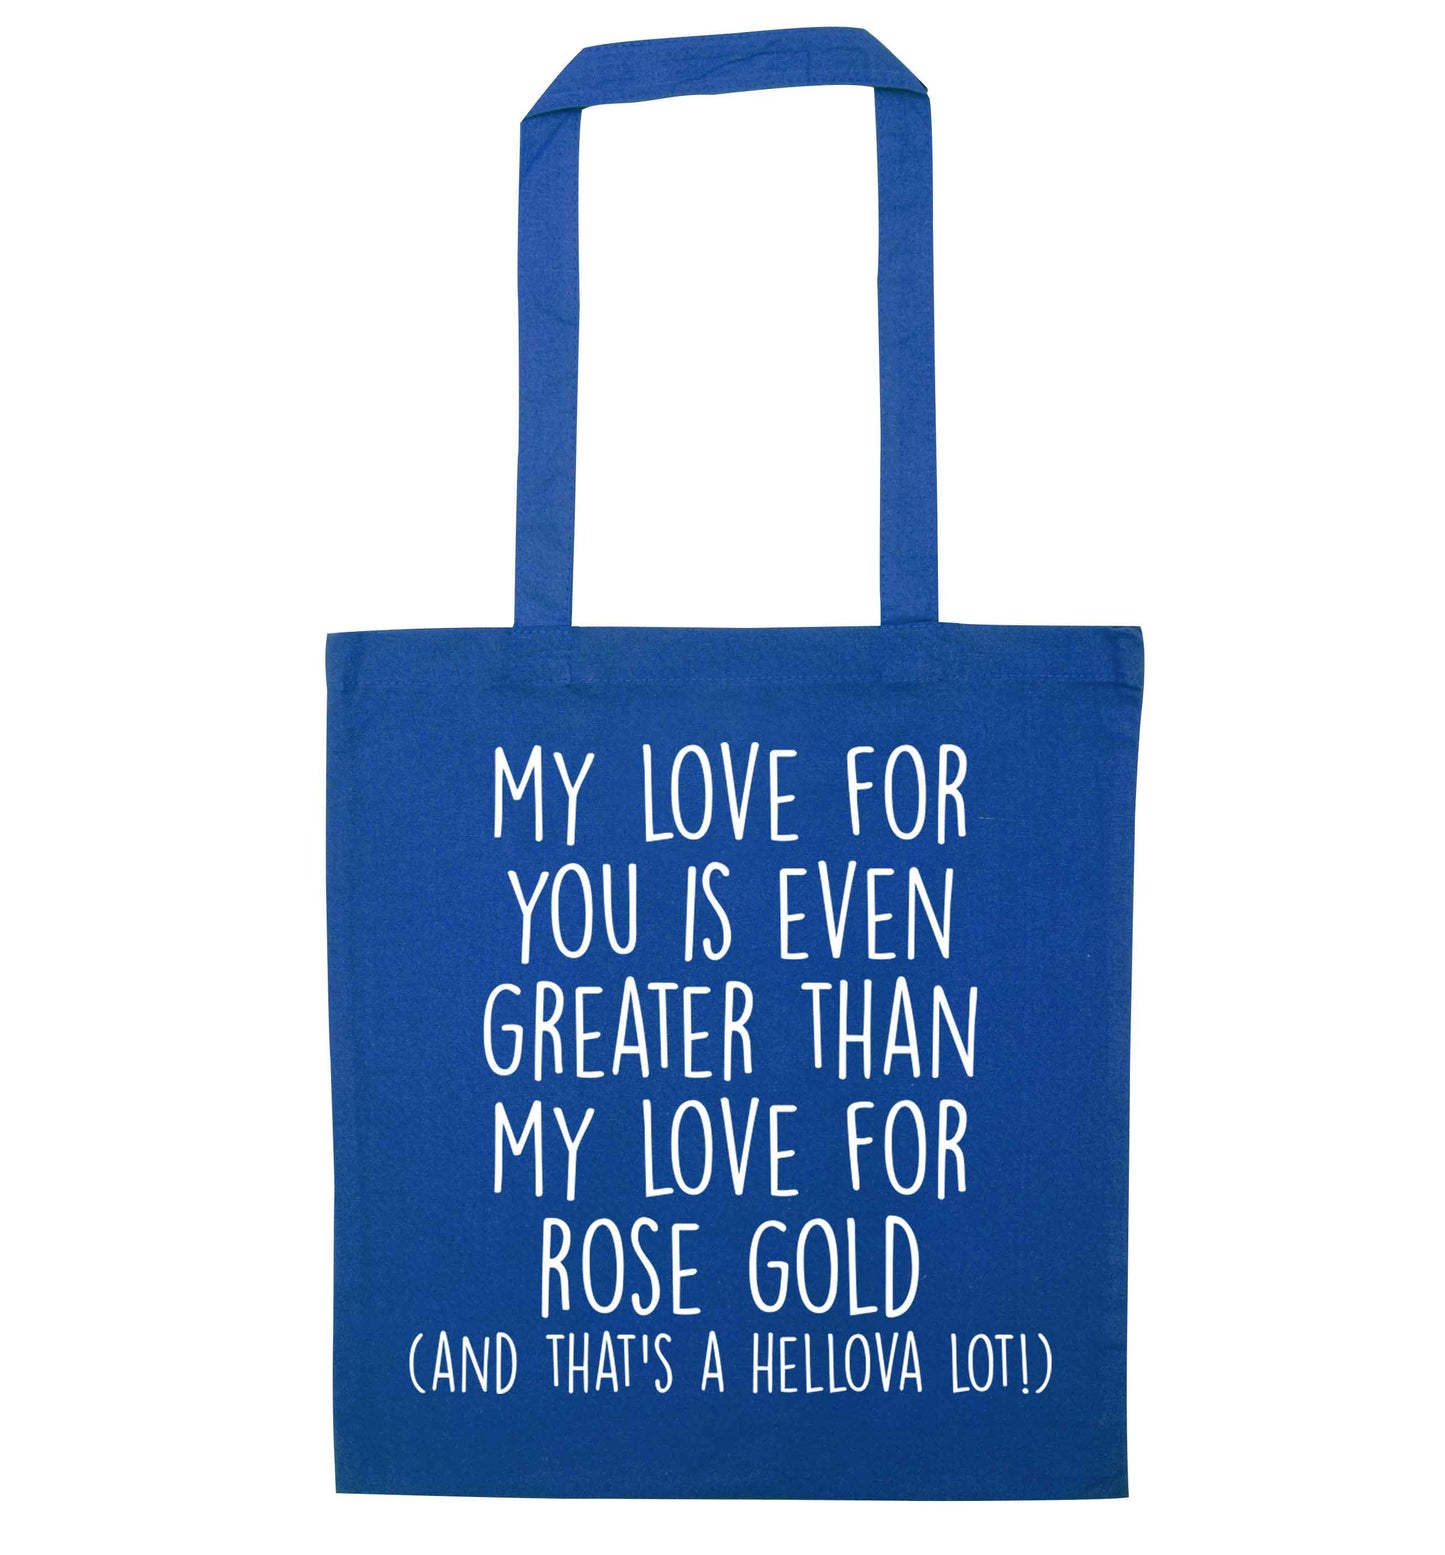 My love for you is even greater than my love for rose gold (and that's a hellova lot) blue tote bag